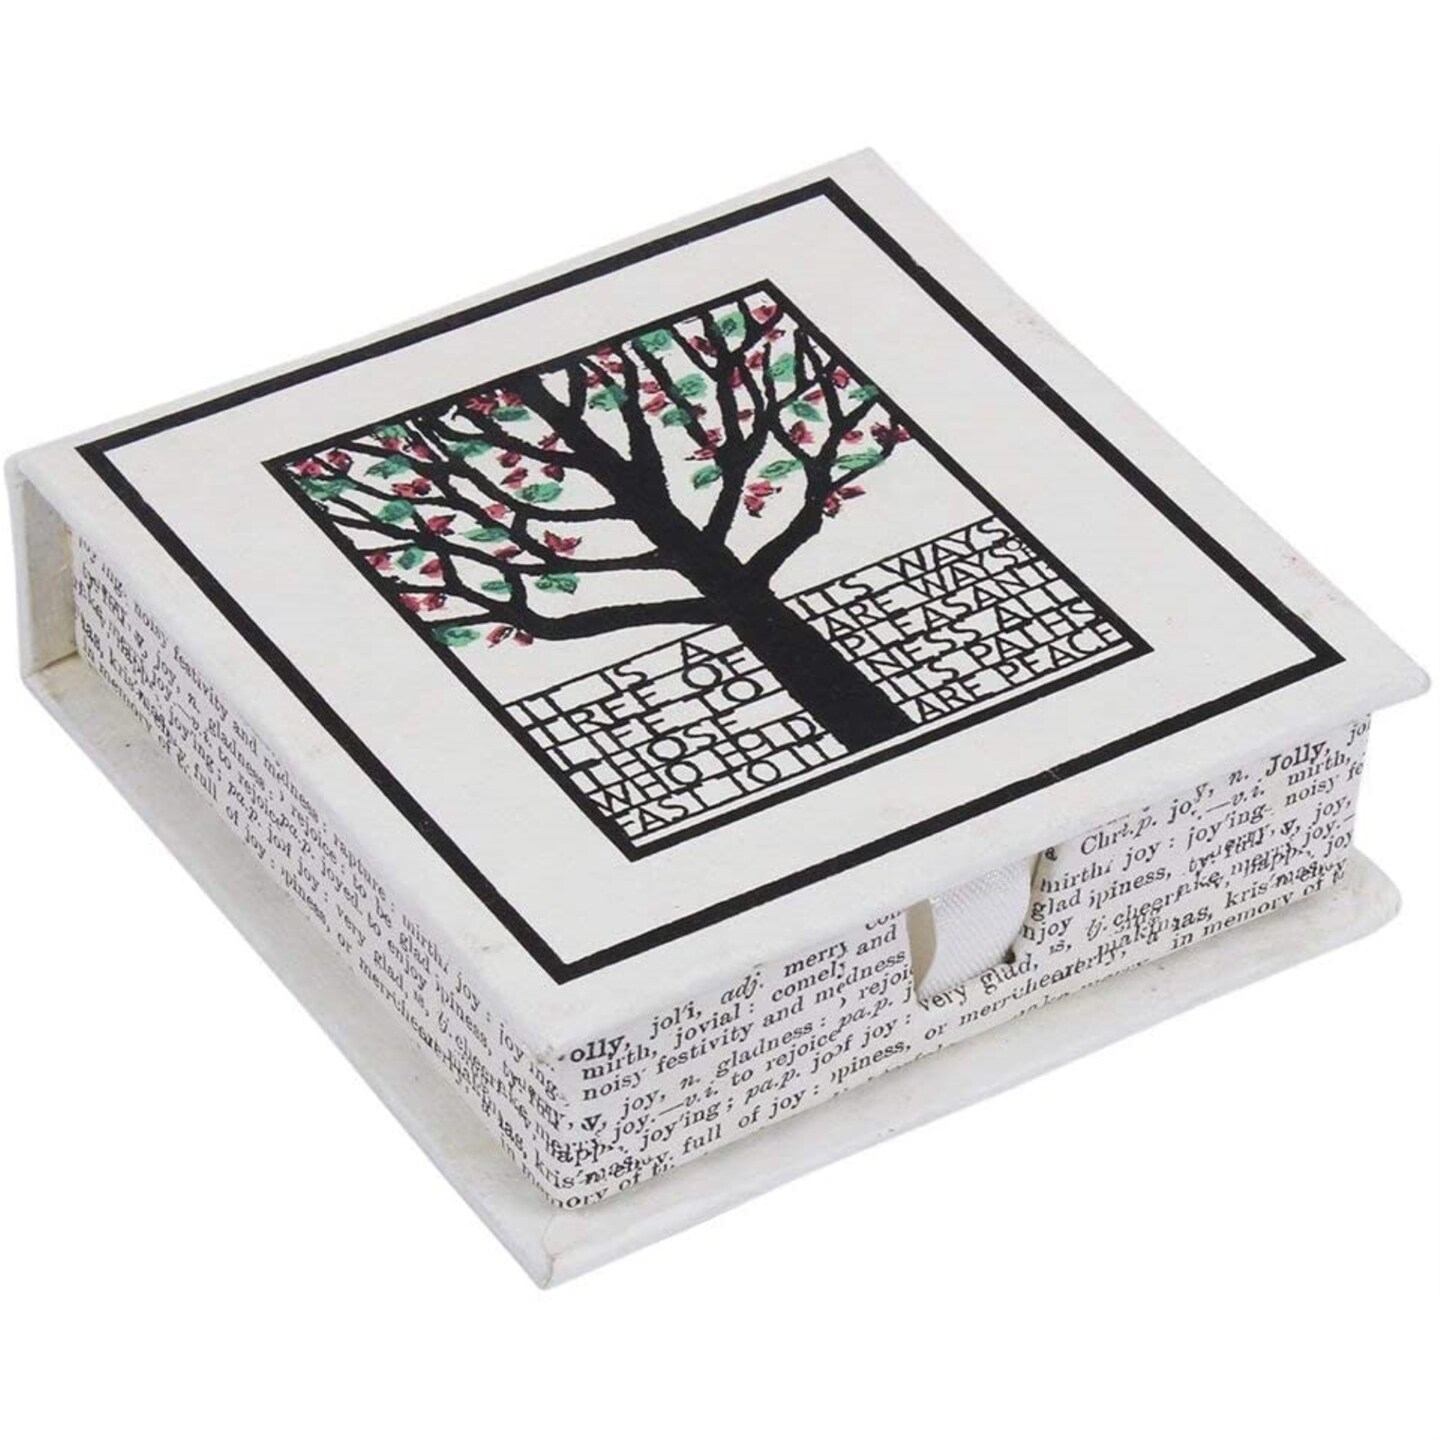 Handmade Eco-Friendly Pages Slip Pad Box Hand painted With Tree Of Life Motif and Matching Ribbon Visiting Card Holder Box Case For Home Office Display Desk Accessories